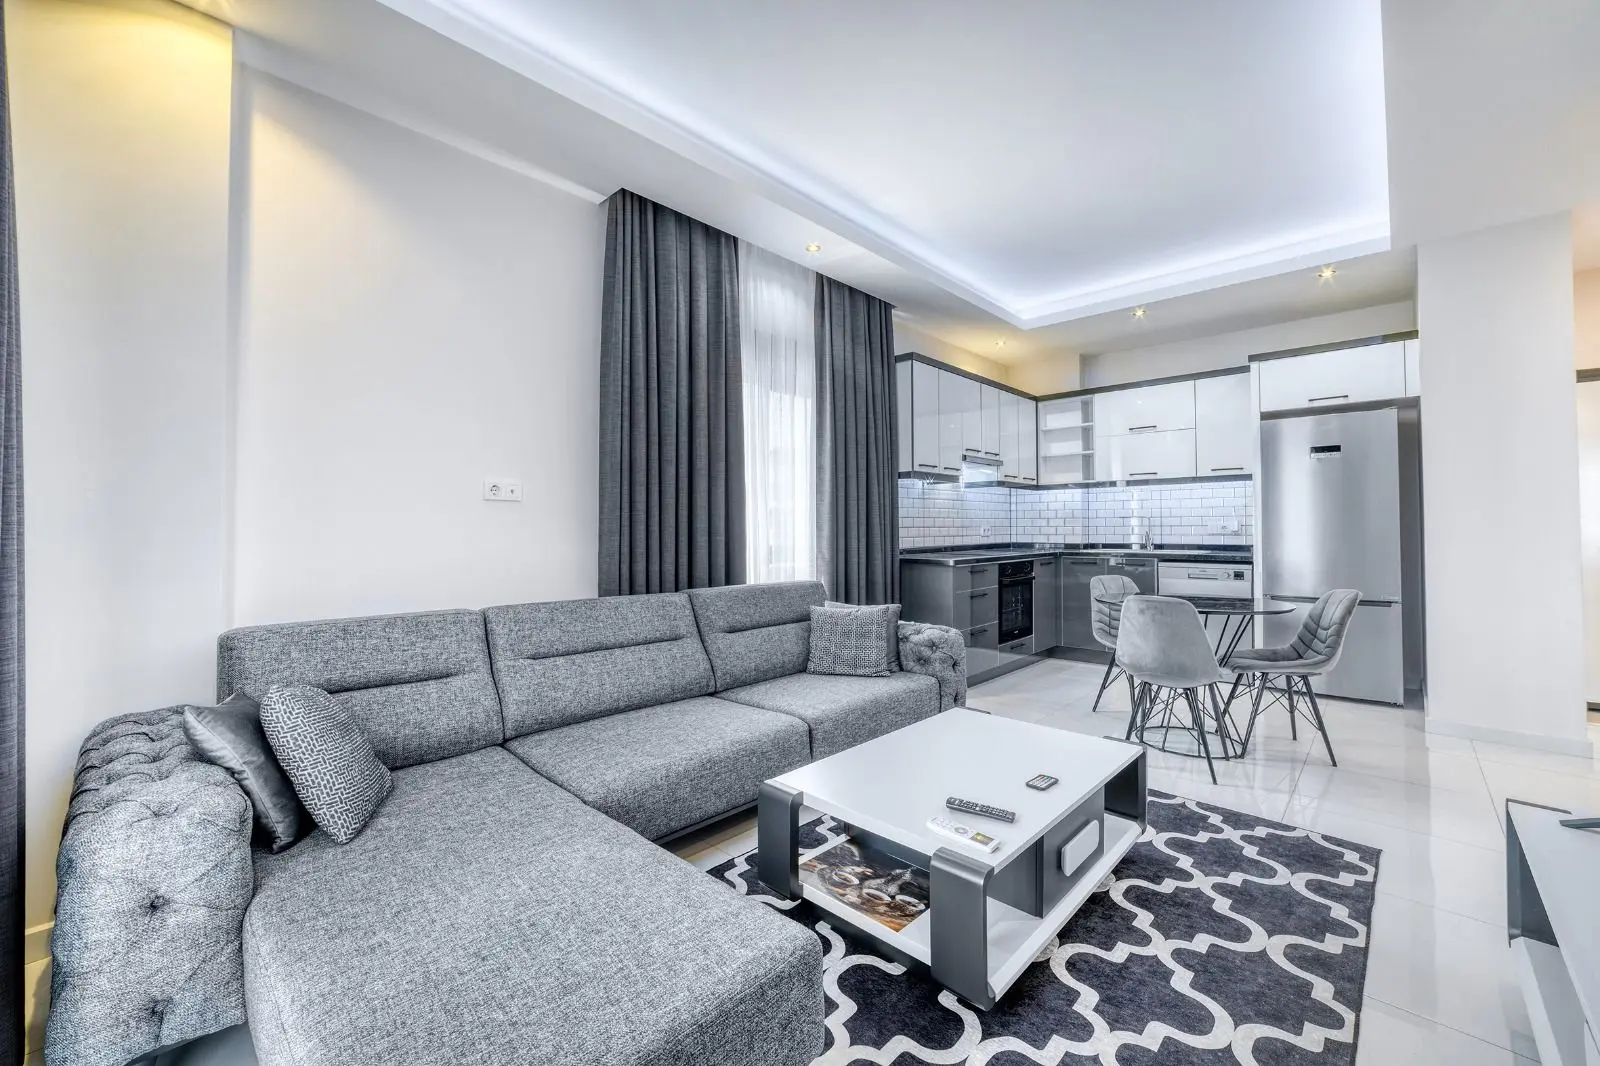 NEW AND FURNISHED APARTMENT 1+1 IN ALANYA, OBA